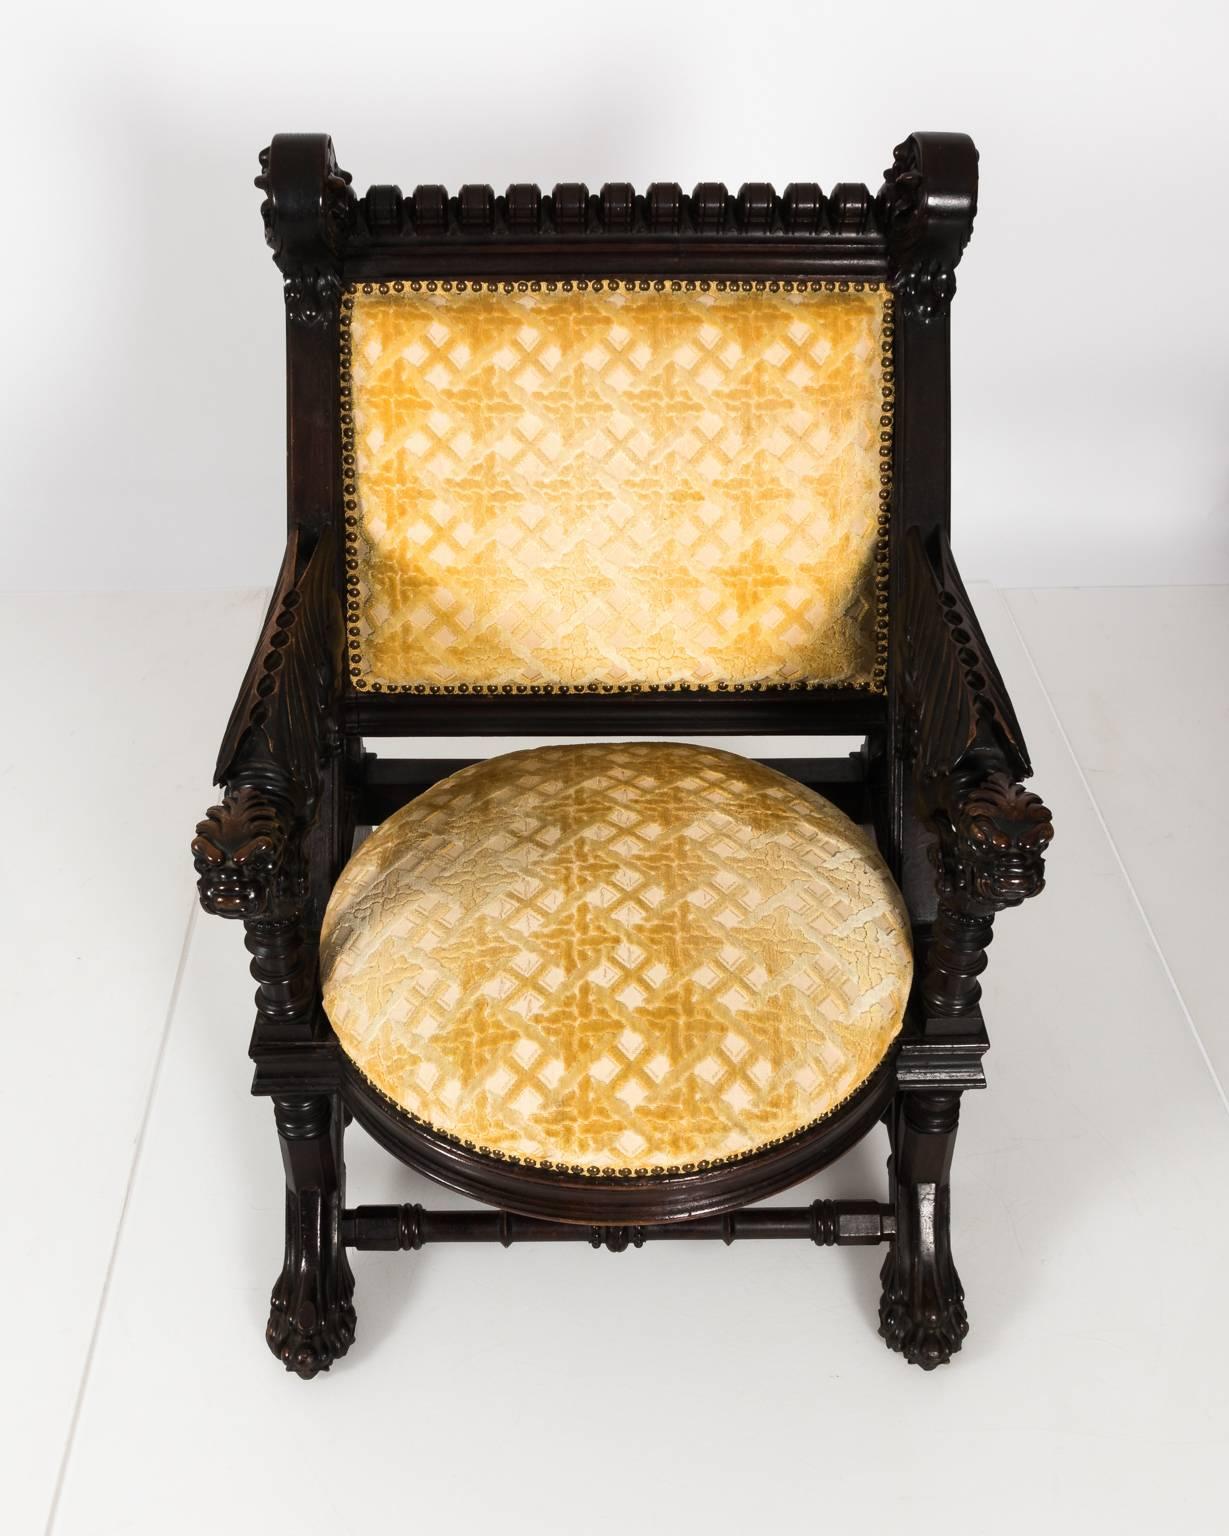 Pair of American Gothic Revival Armchairs by Daniel Pabst, circa 1878 For Sale 8